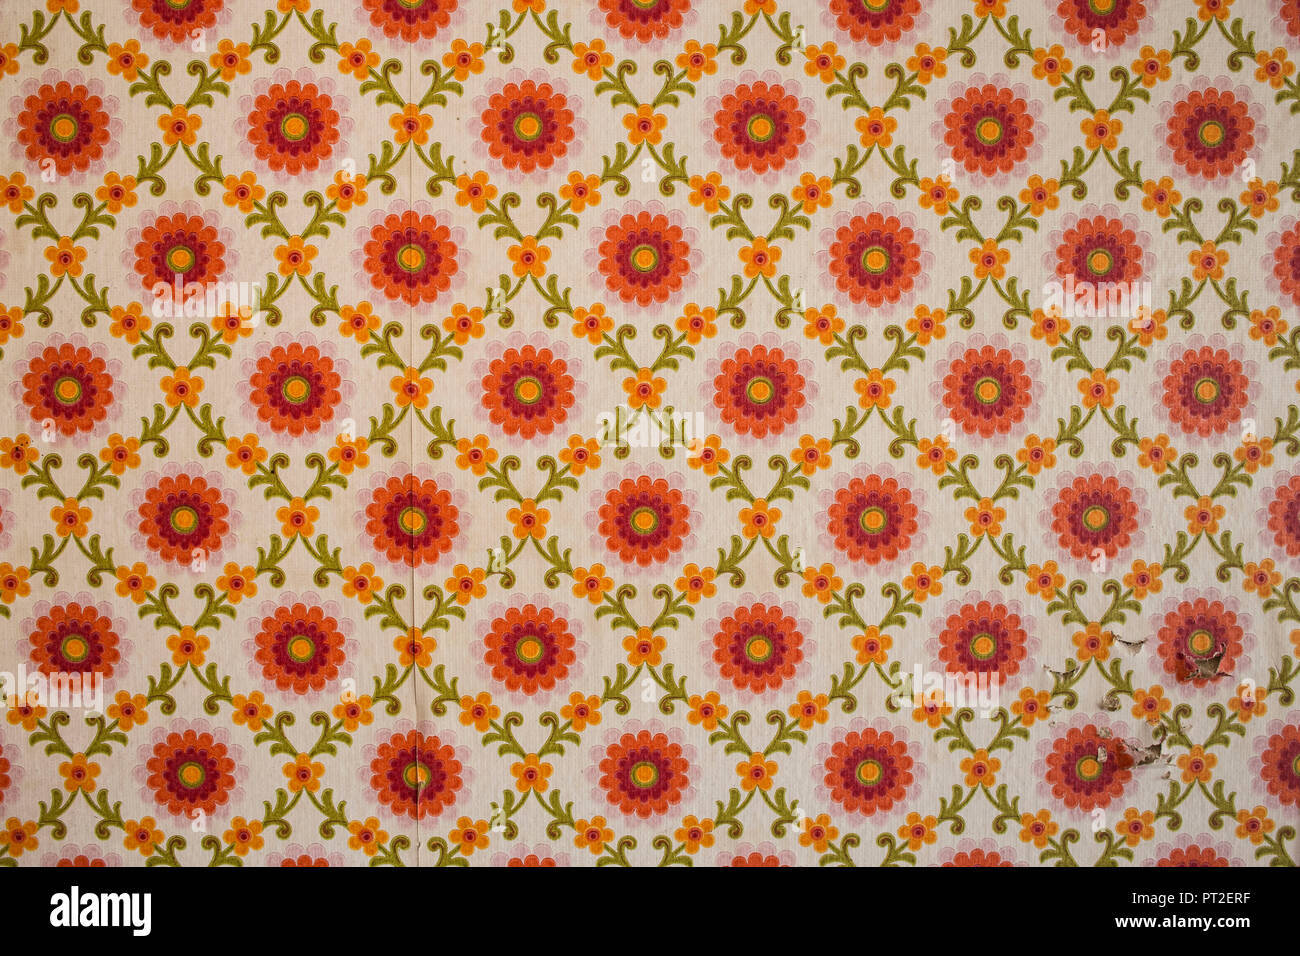 Vibrant and Colorful Vintage 70s Style Wallpaper